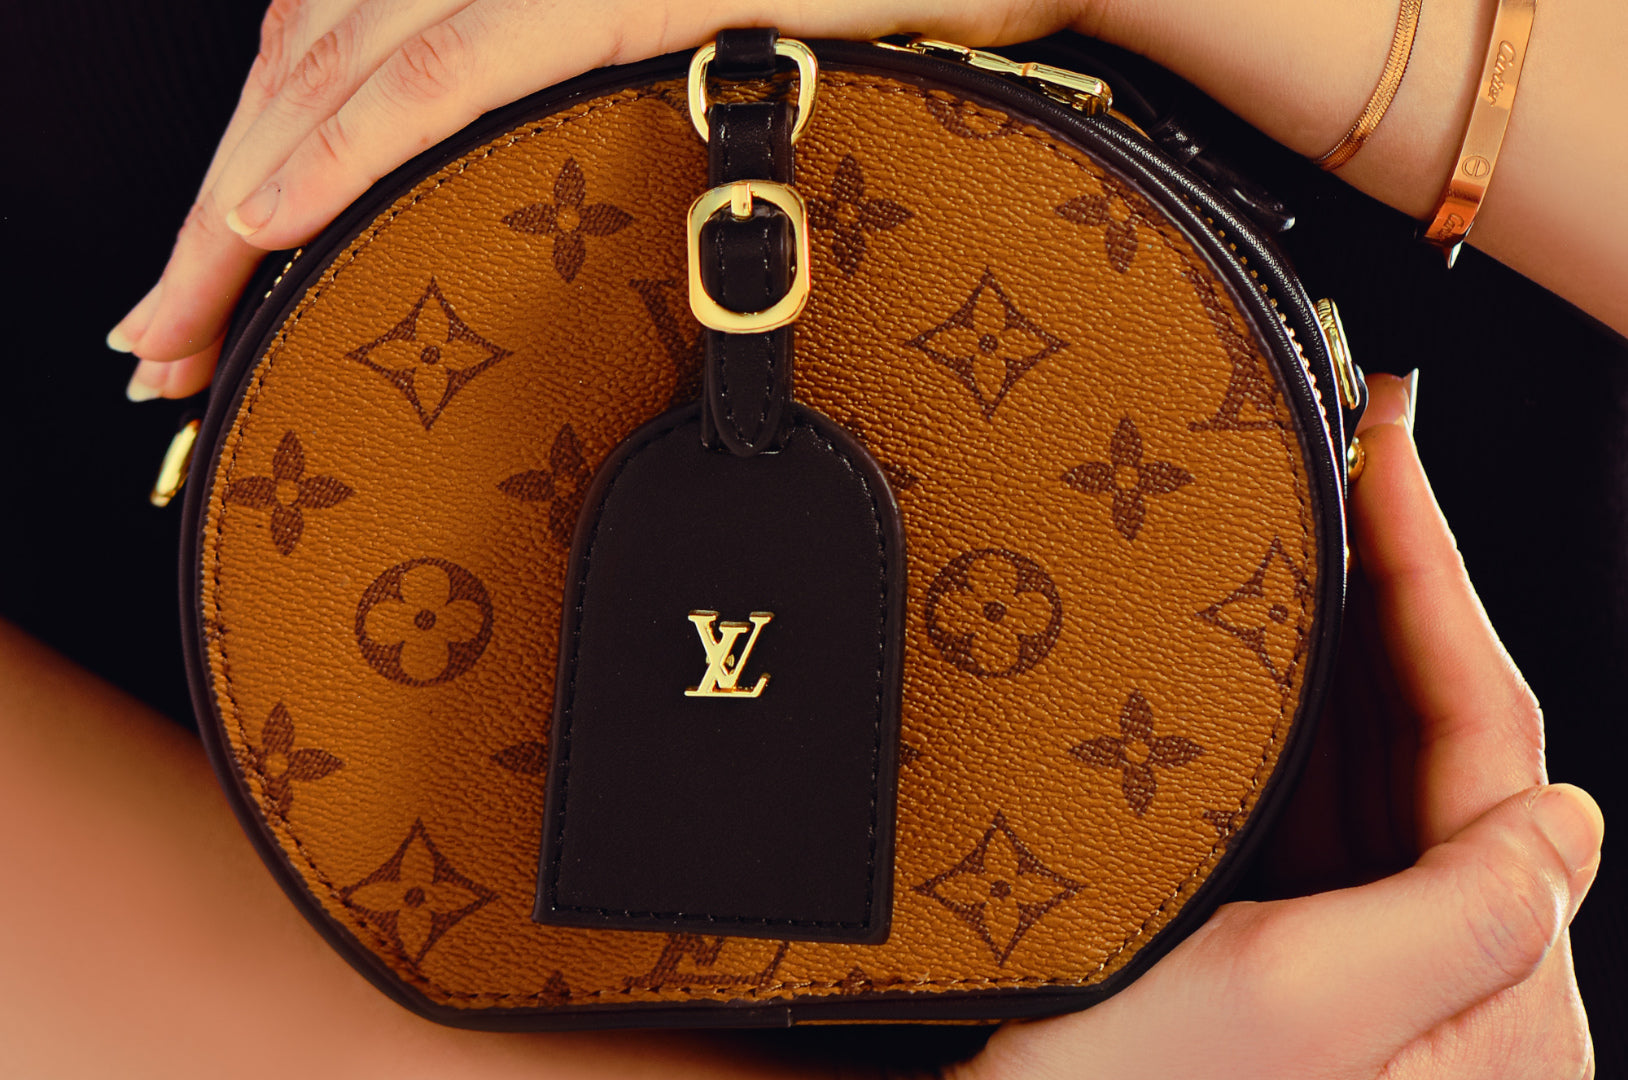 Louis Vuitton - Bridging past to present. The new LV Arch Bag from